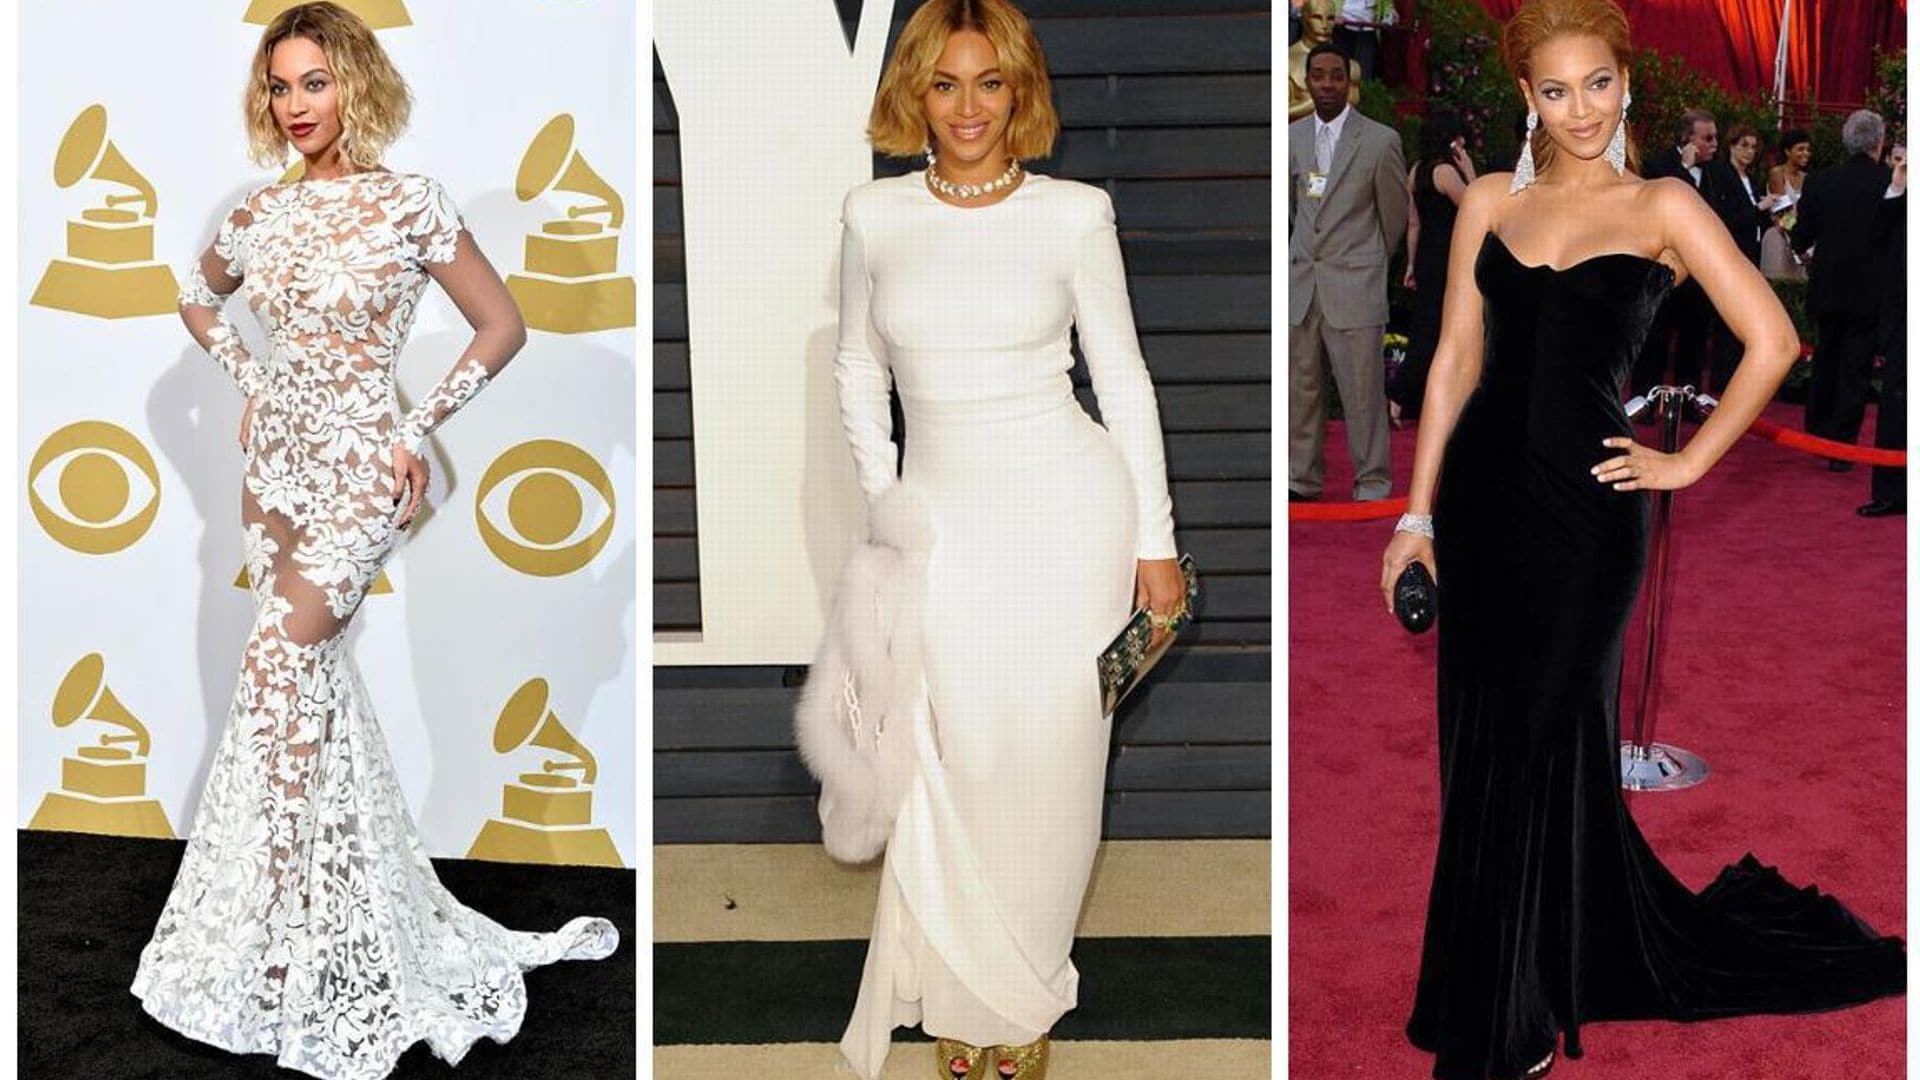 From barely there to full bling: 12 times Beyoncé slayed the red carpet